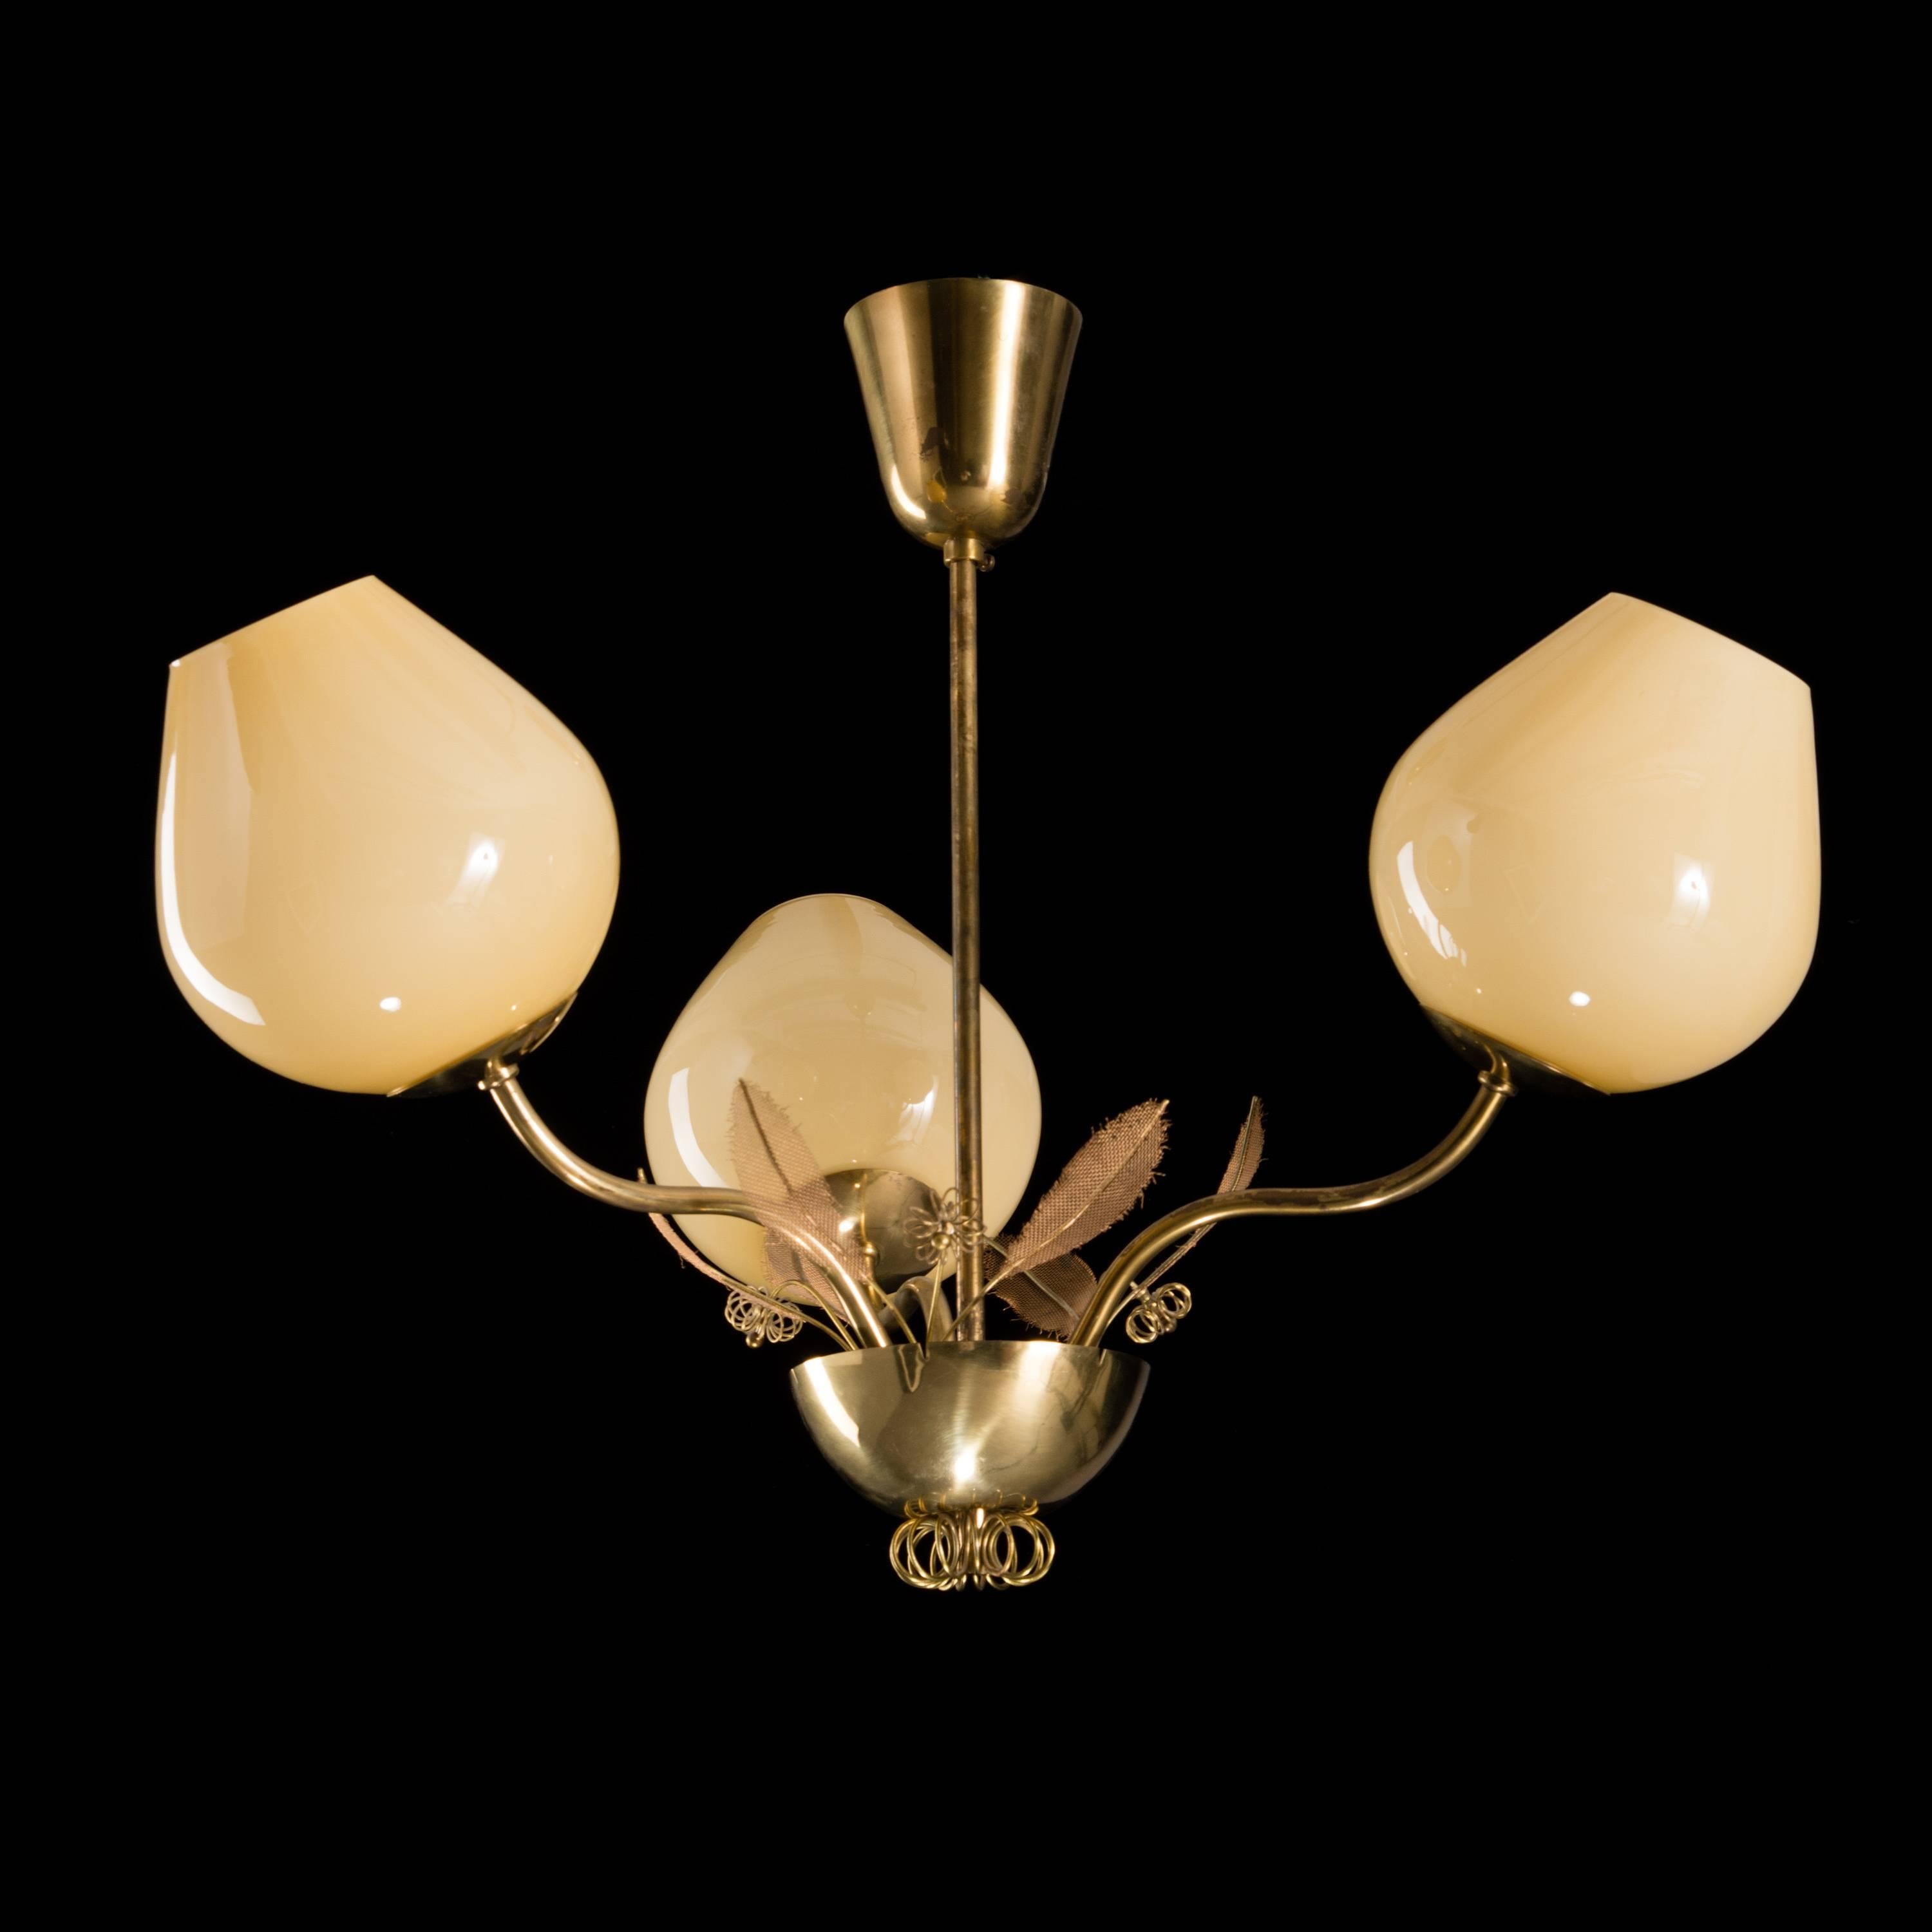 Beautiful Paavo Tynell chandelier. Trademark leaves and brass roundedness surround the scalloped bras centre. Produced by Idman.